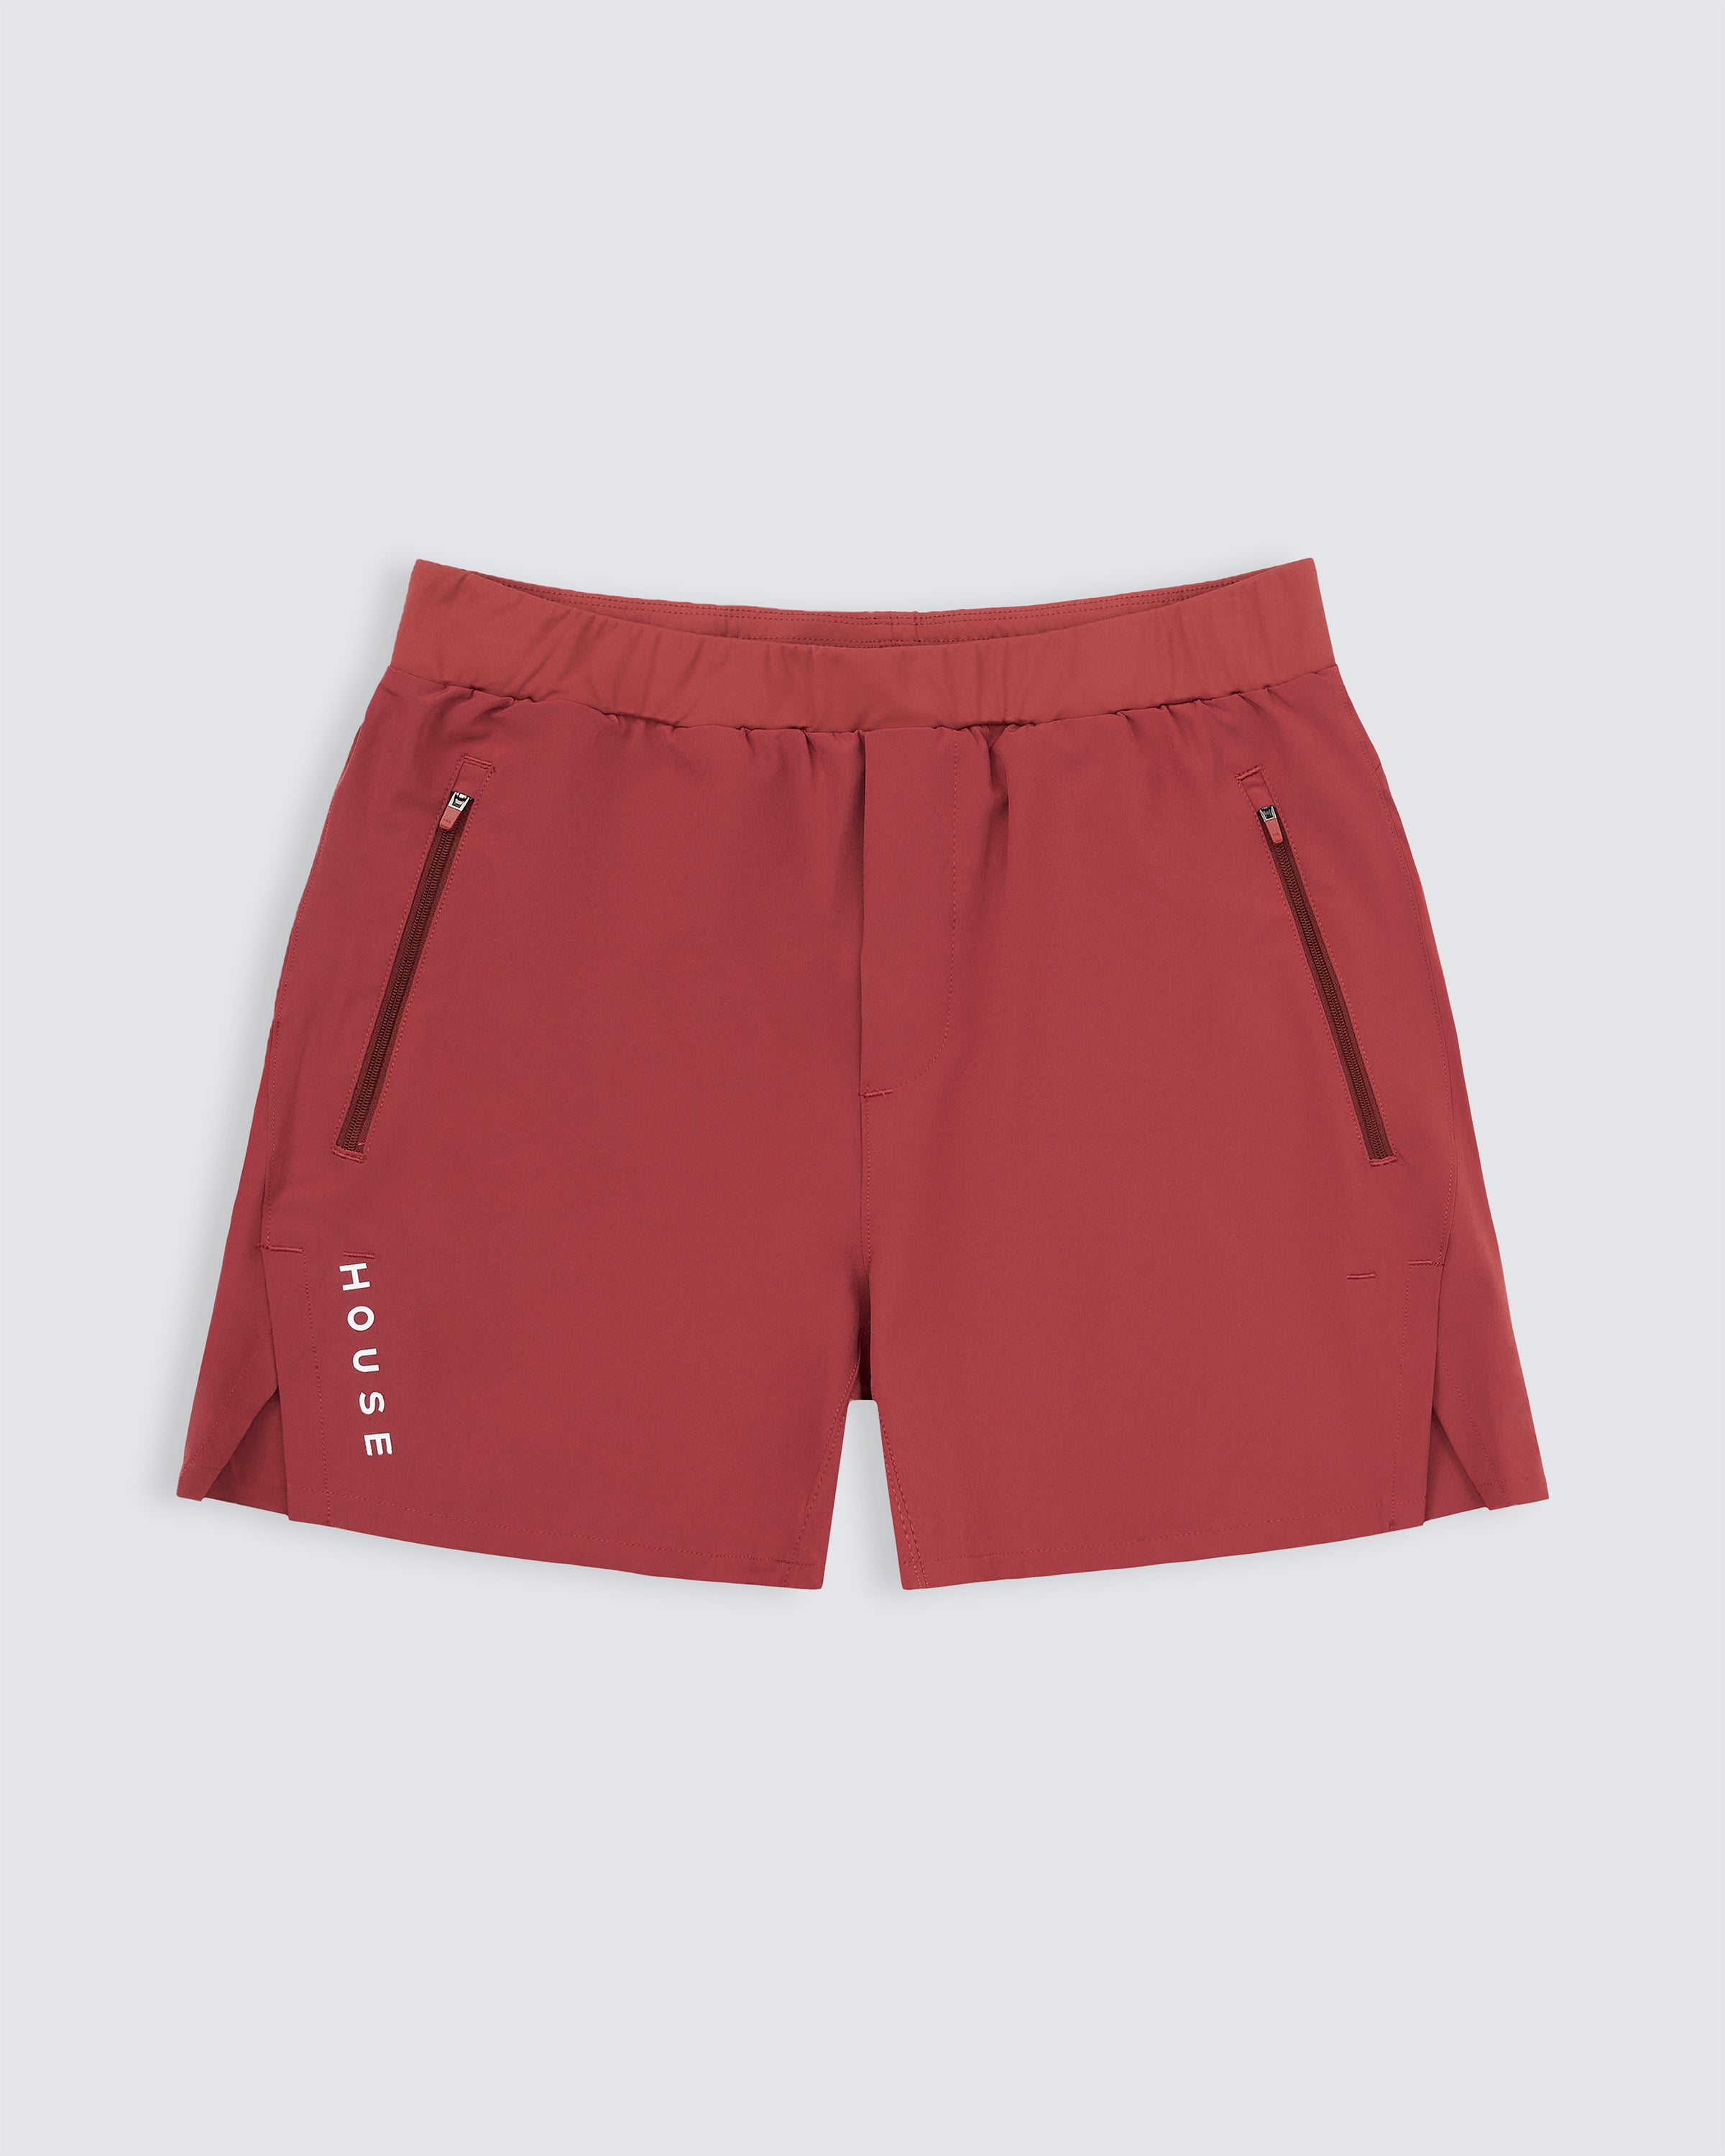 Unlined sports short in mars red